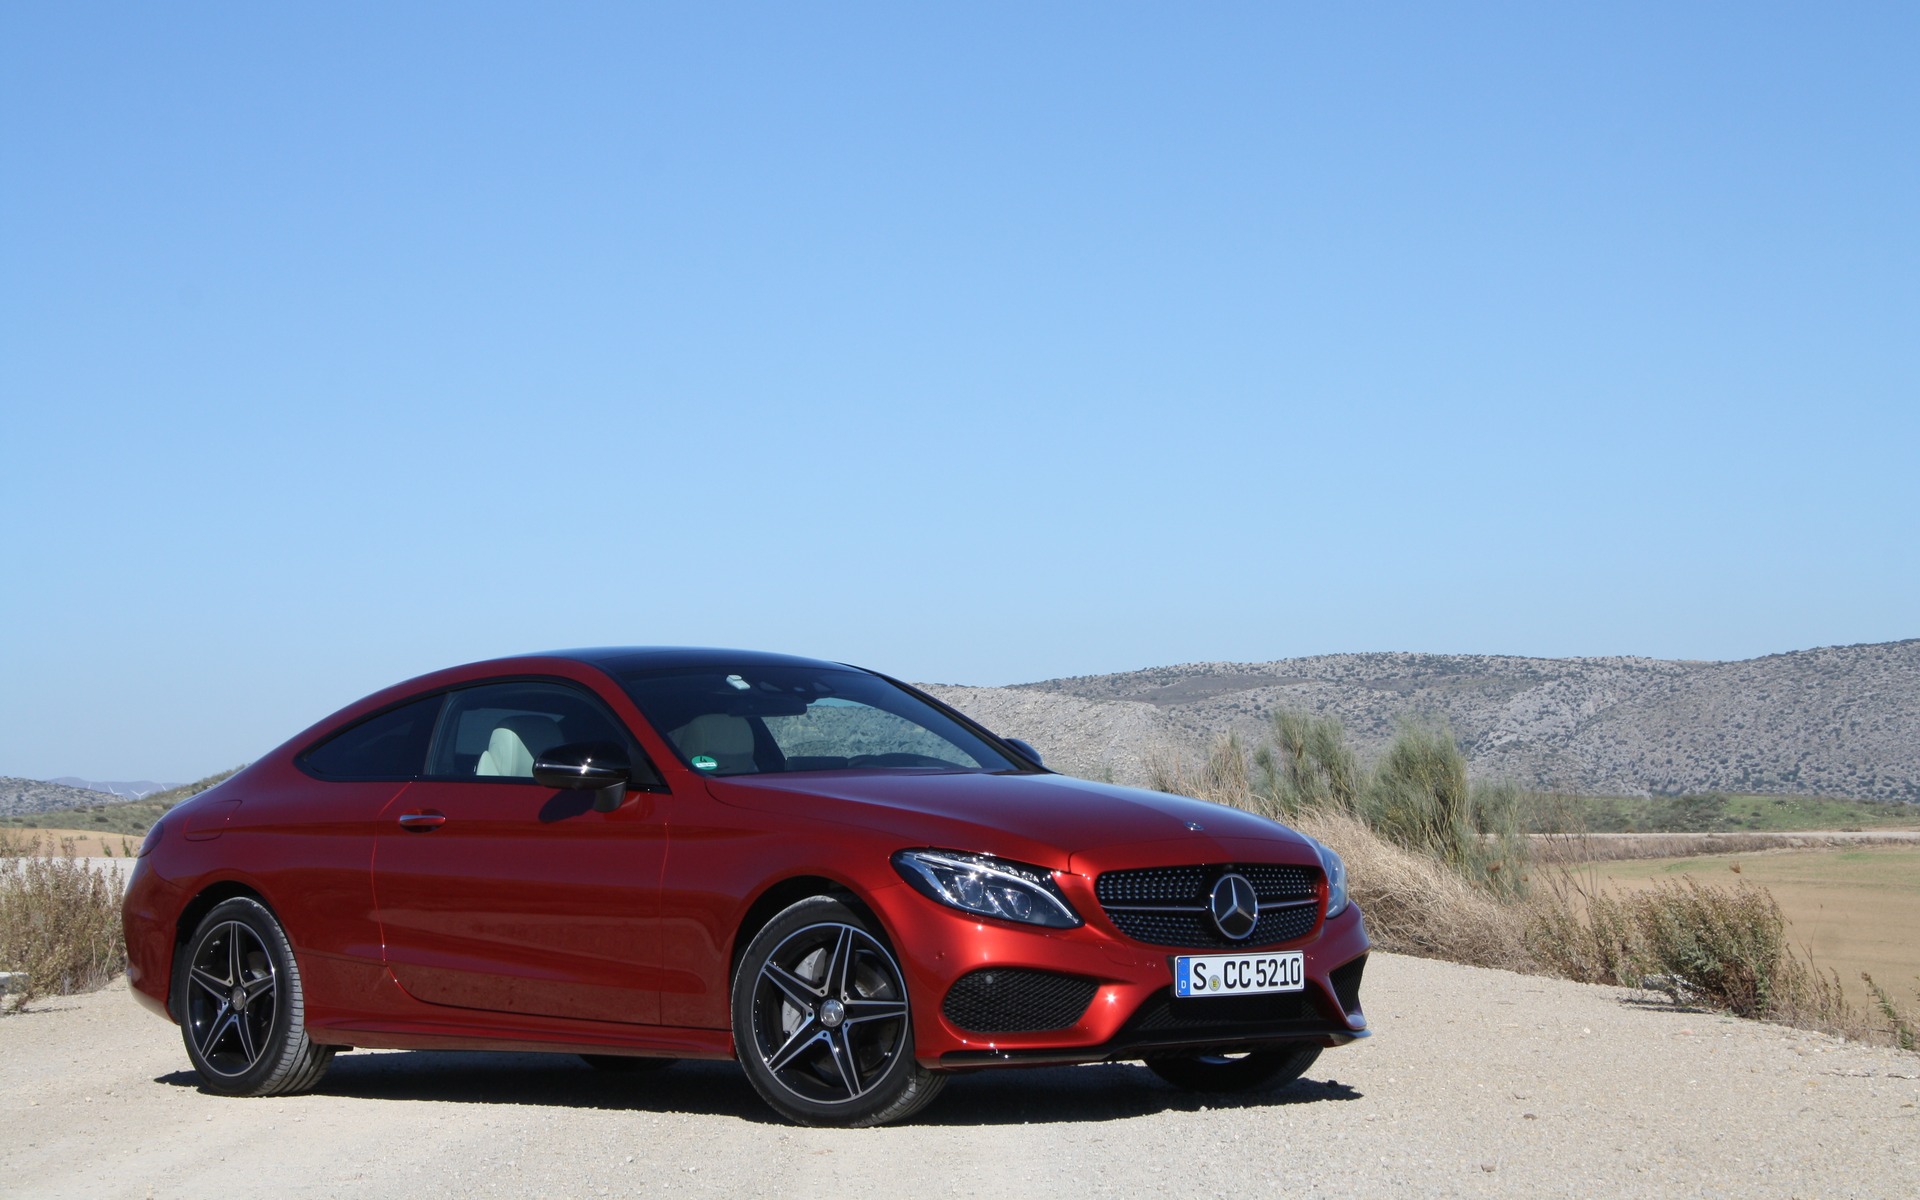 The first 2017 C-Class Coupe to arrive in Canada will be the C 300 4MATIC.